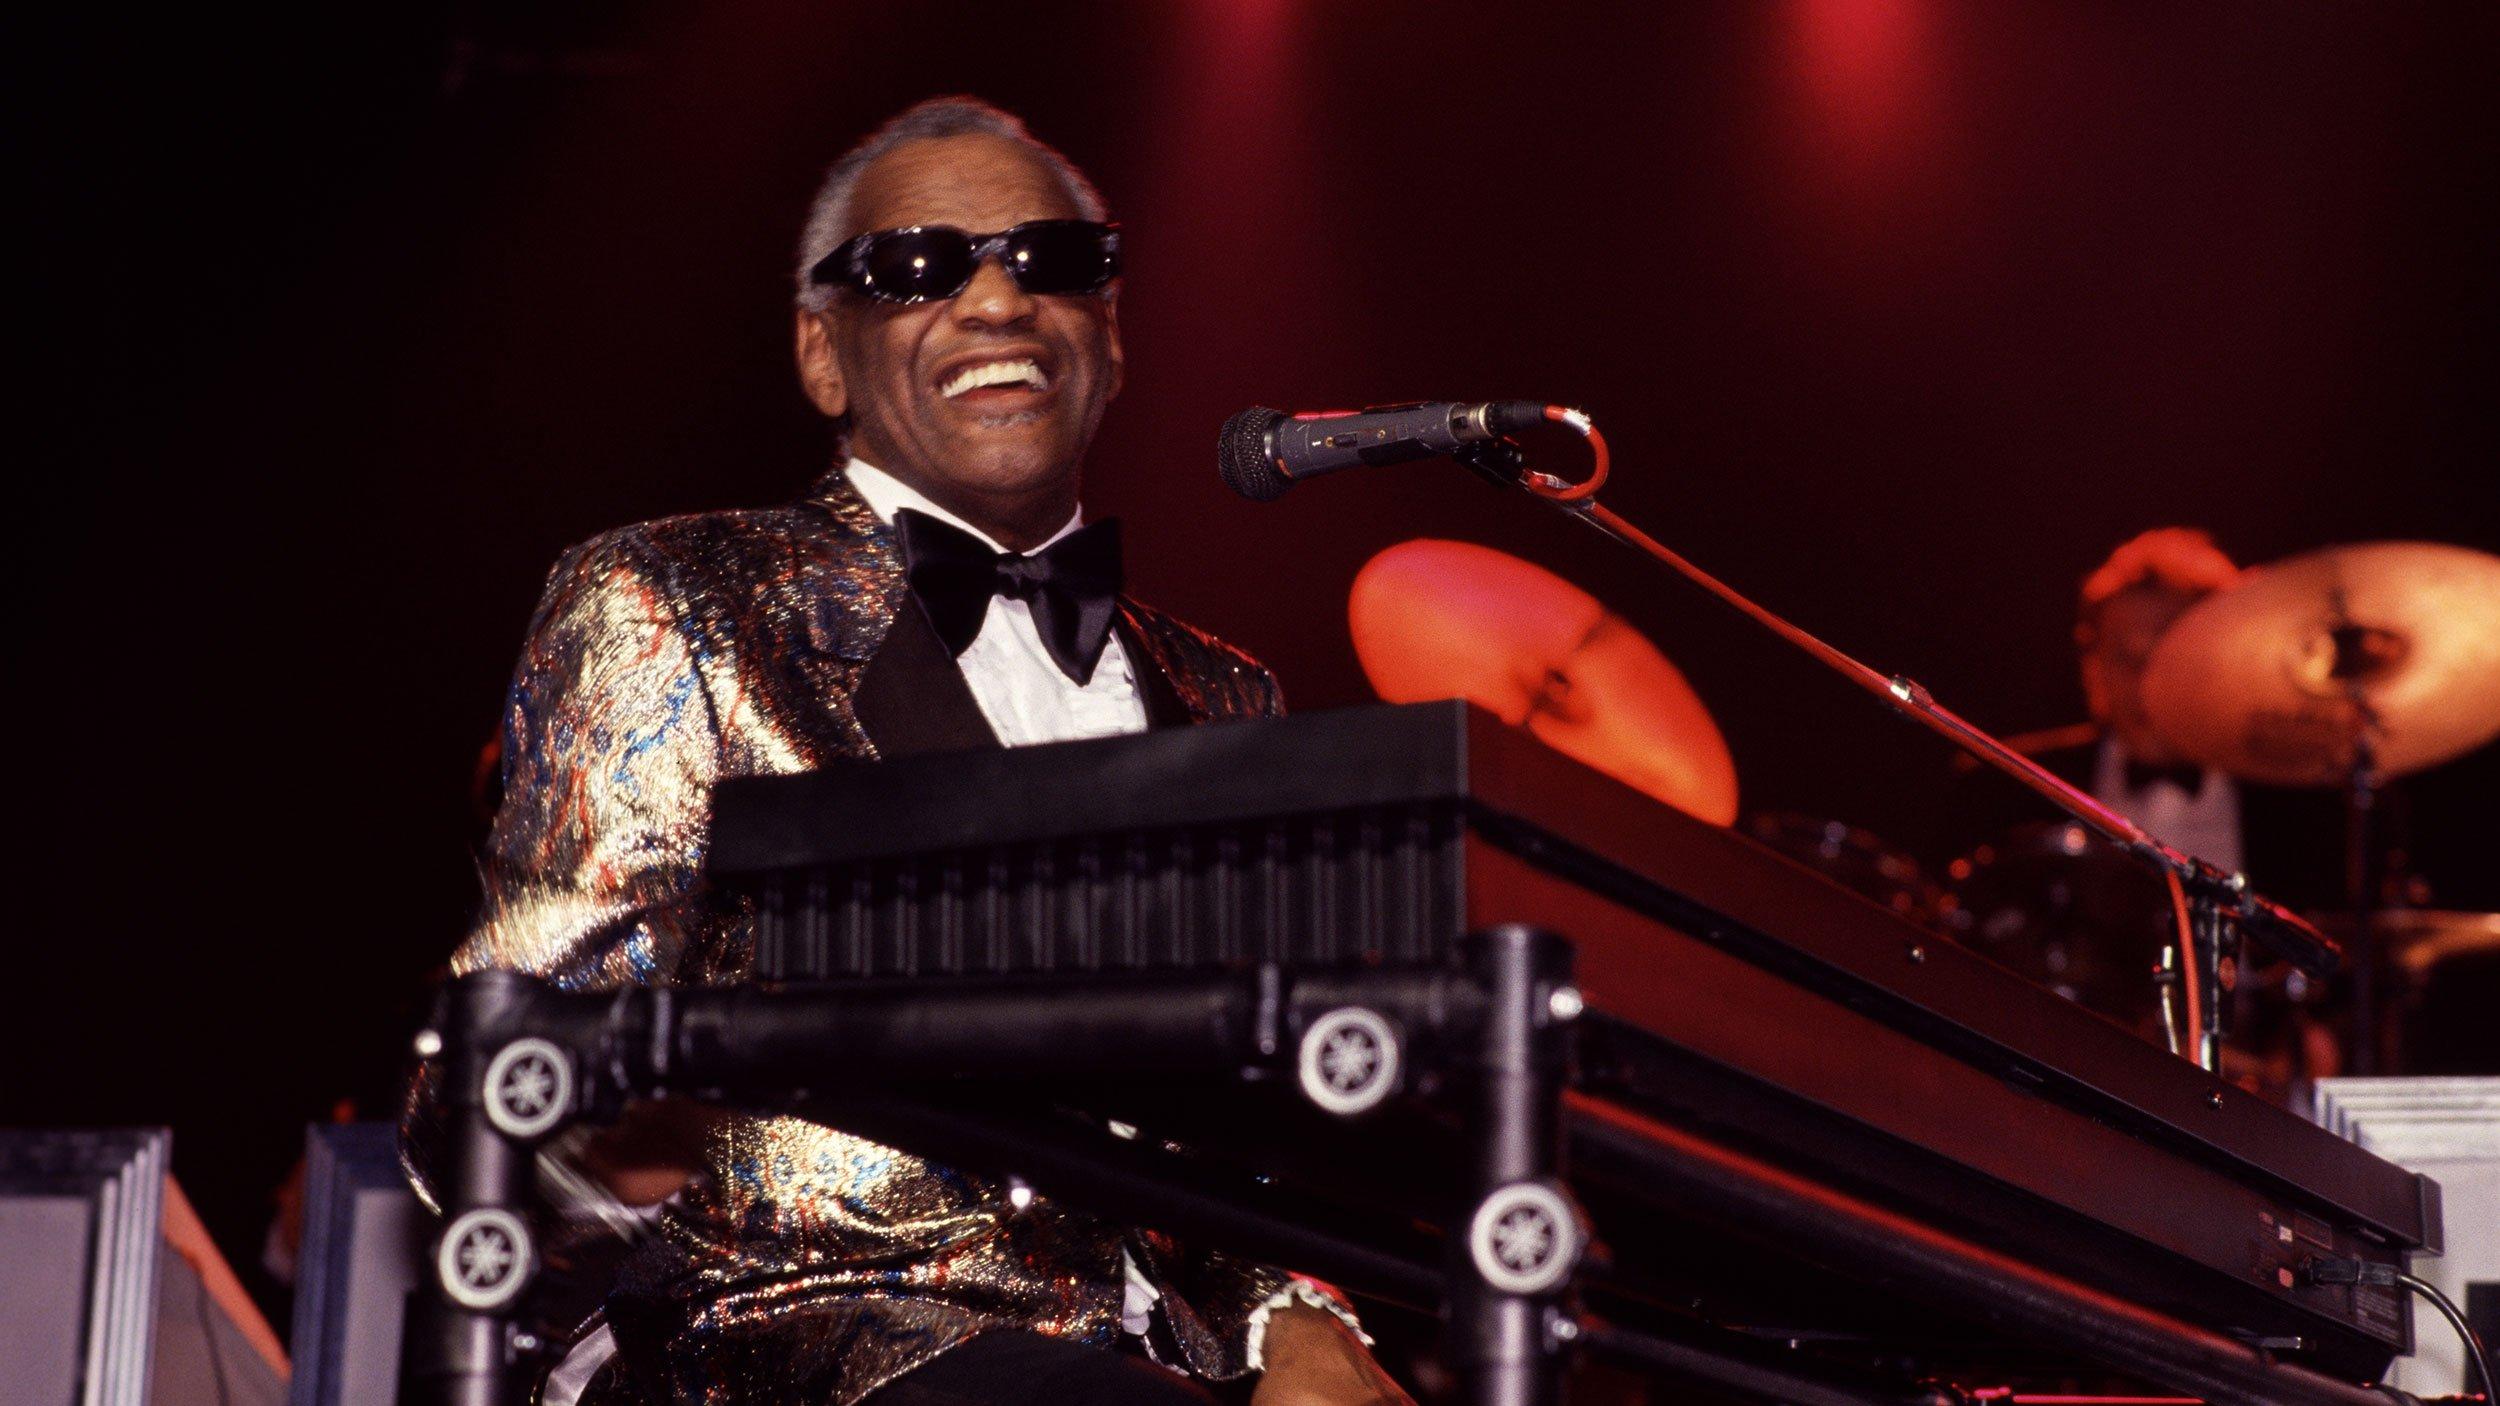 Ray Charles plays piano as he performs onstage in Portugal in 1988.